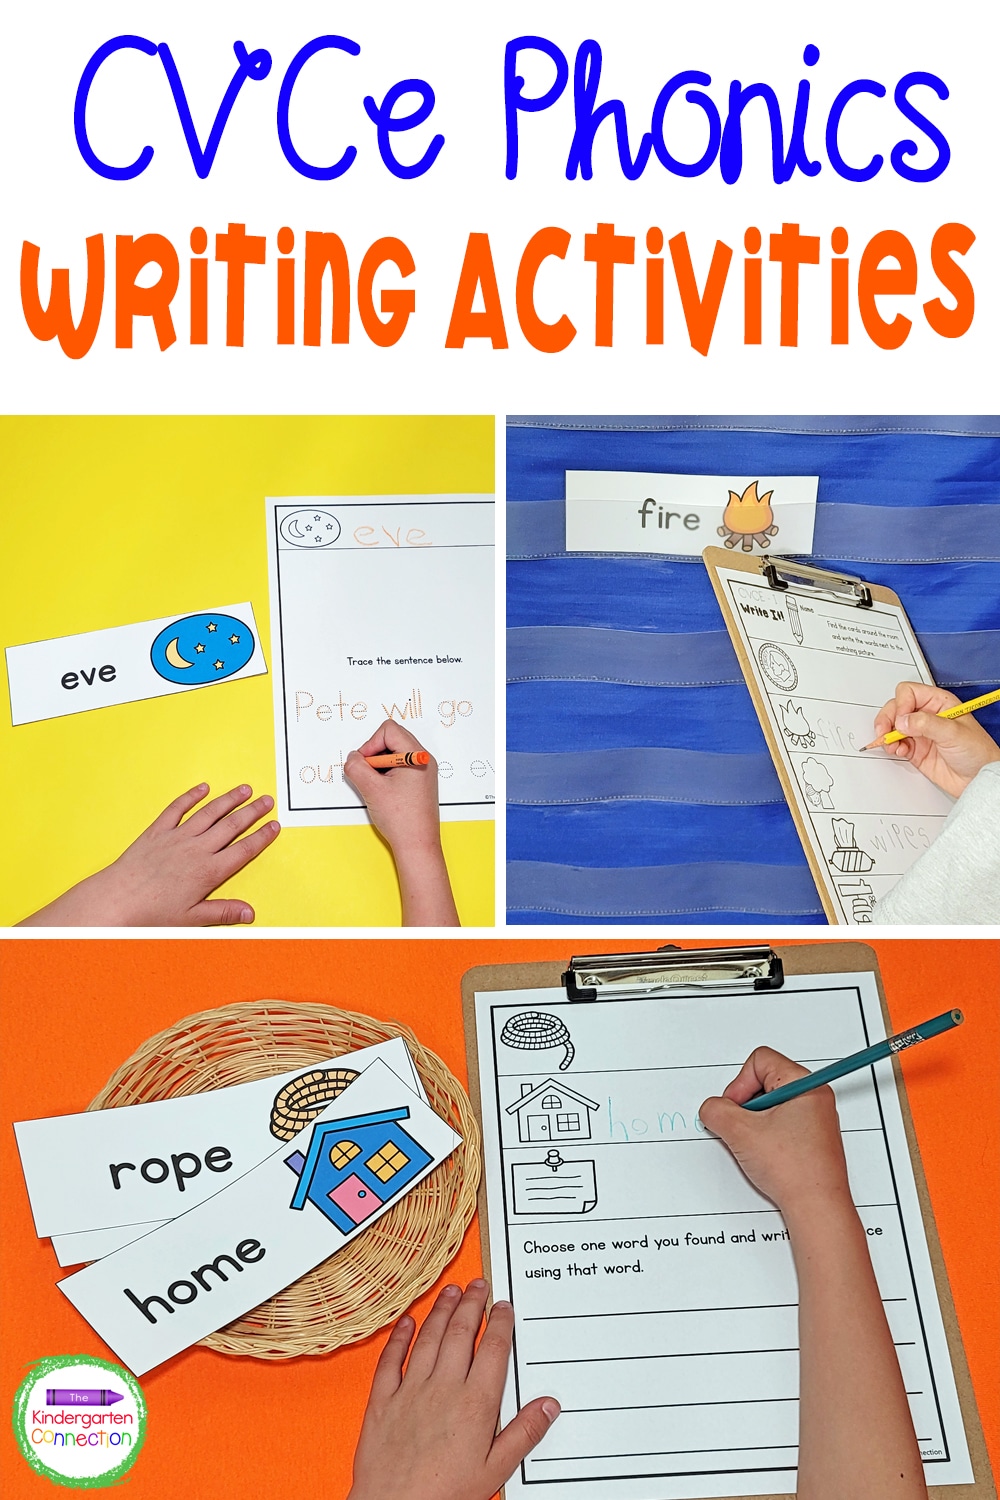 These CVCe Phonics Writing Activities for Kindergarten reinforce important reading skills and encourage movement.